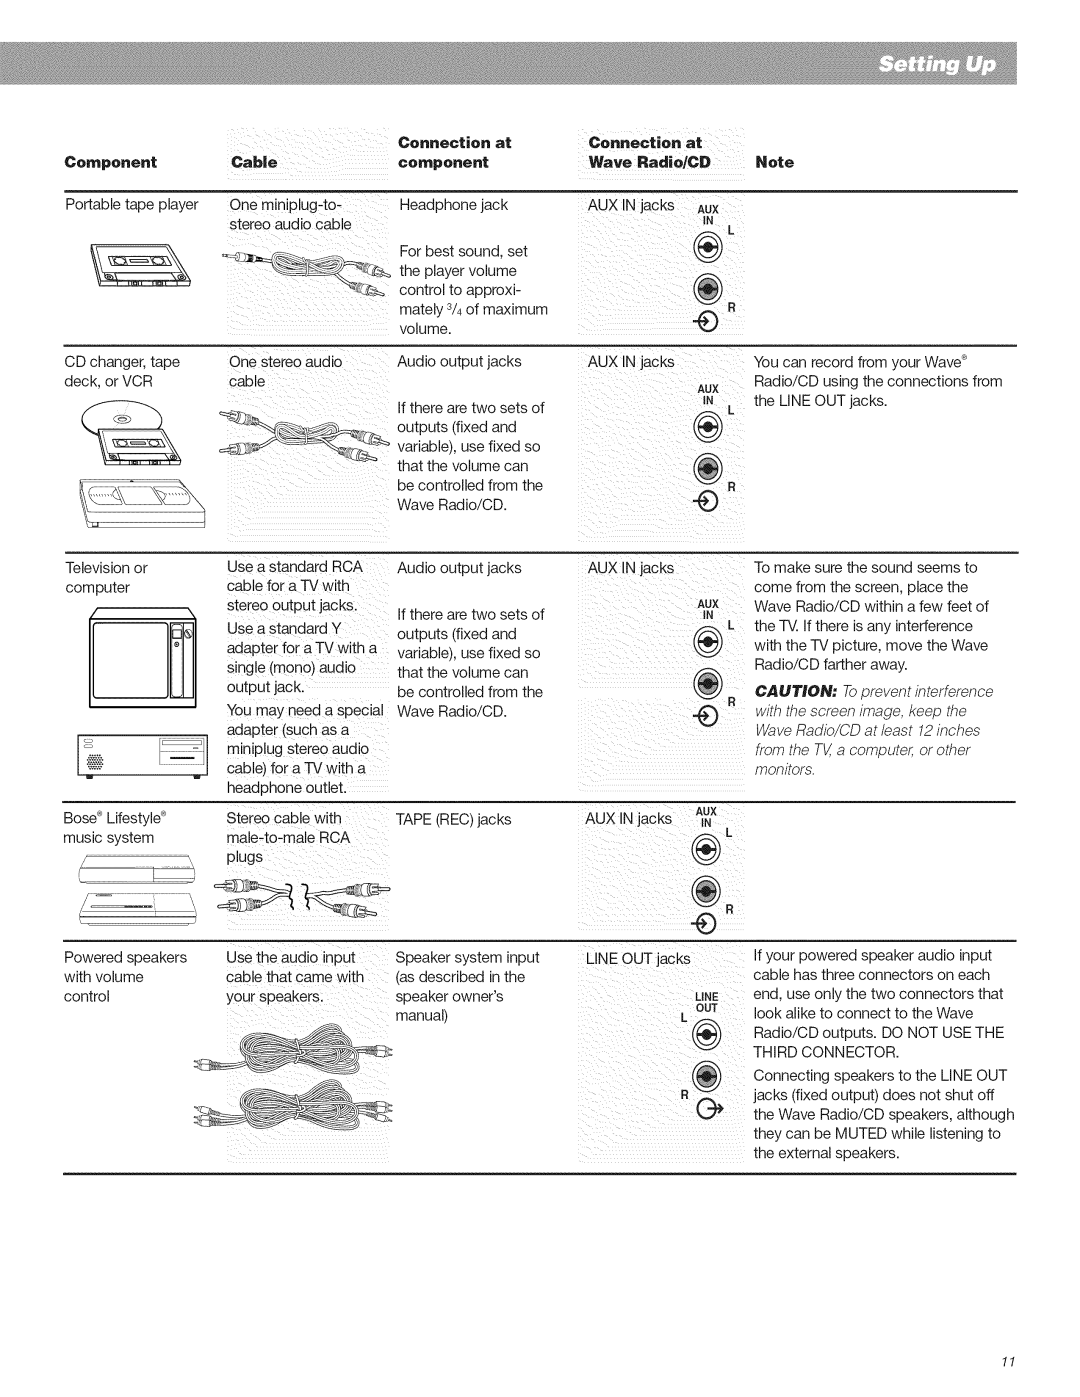 Bose CD Player manual Connection at, Component, Cable, component, Connectien at Wave Radio/CD Note 